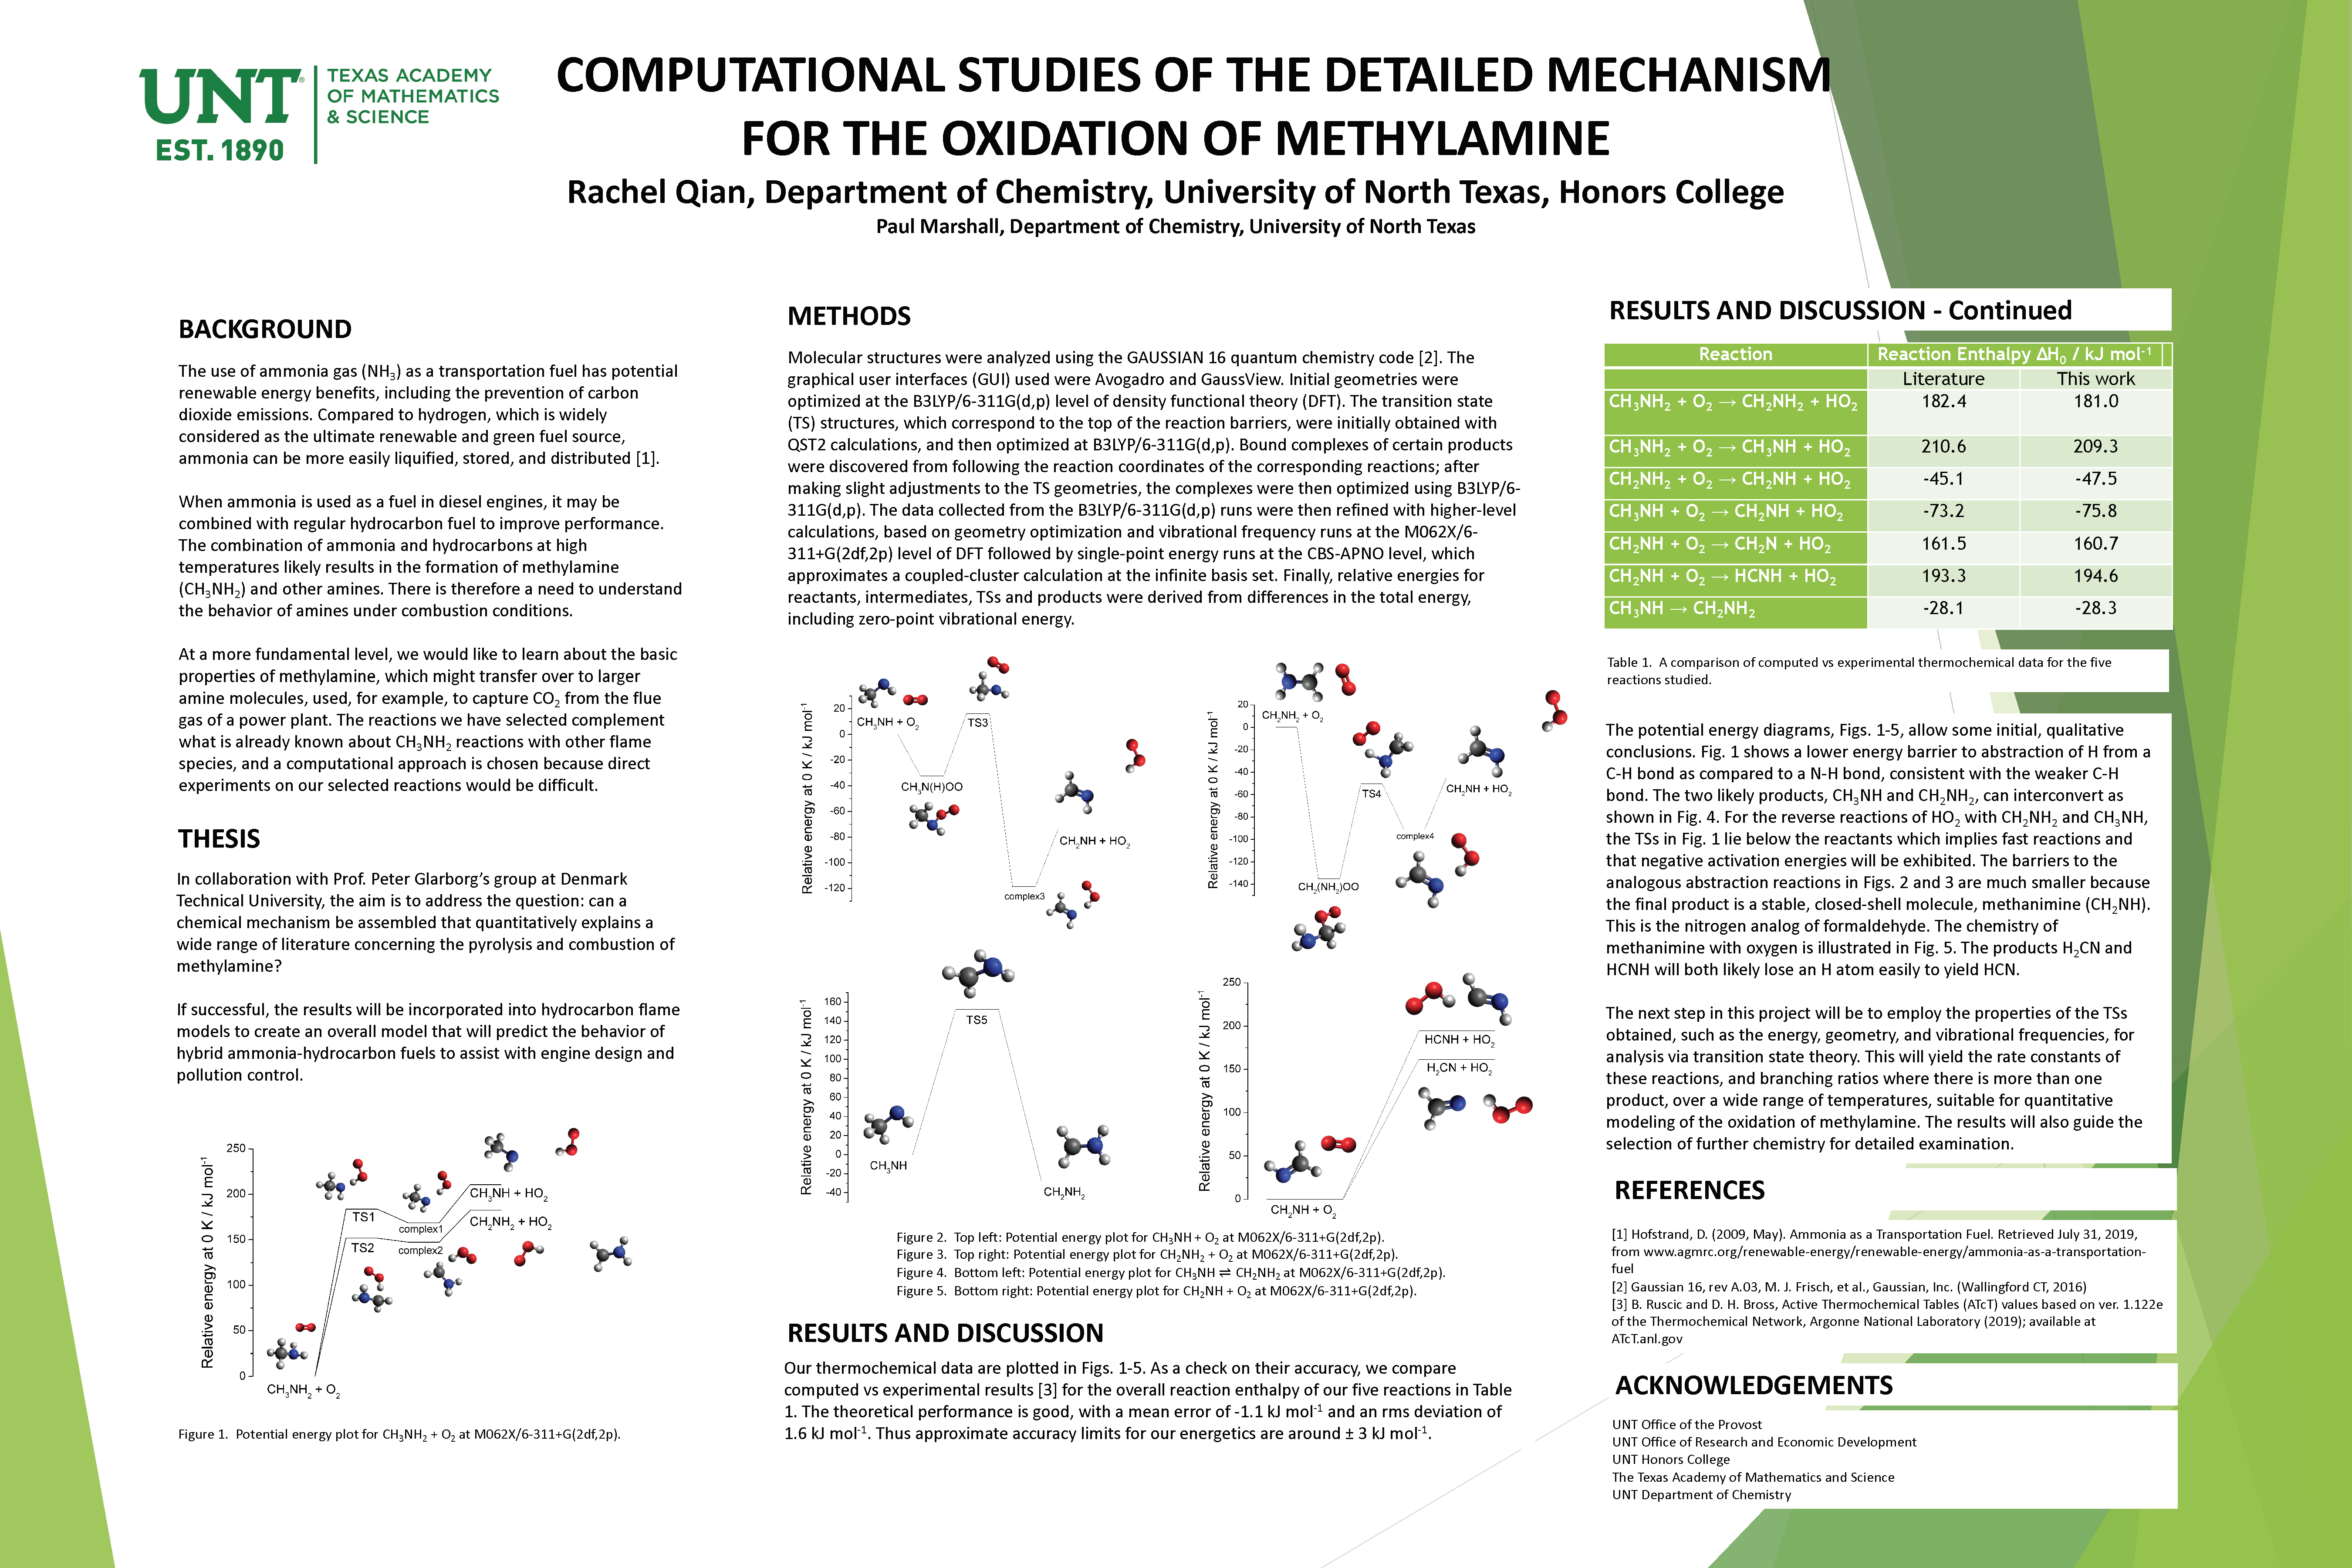 Computational Studies of the Detailed Mechanism for the Oxidation of Methylamine